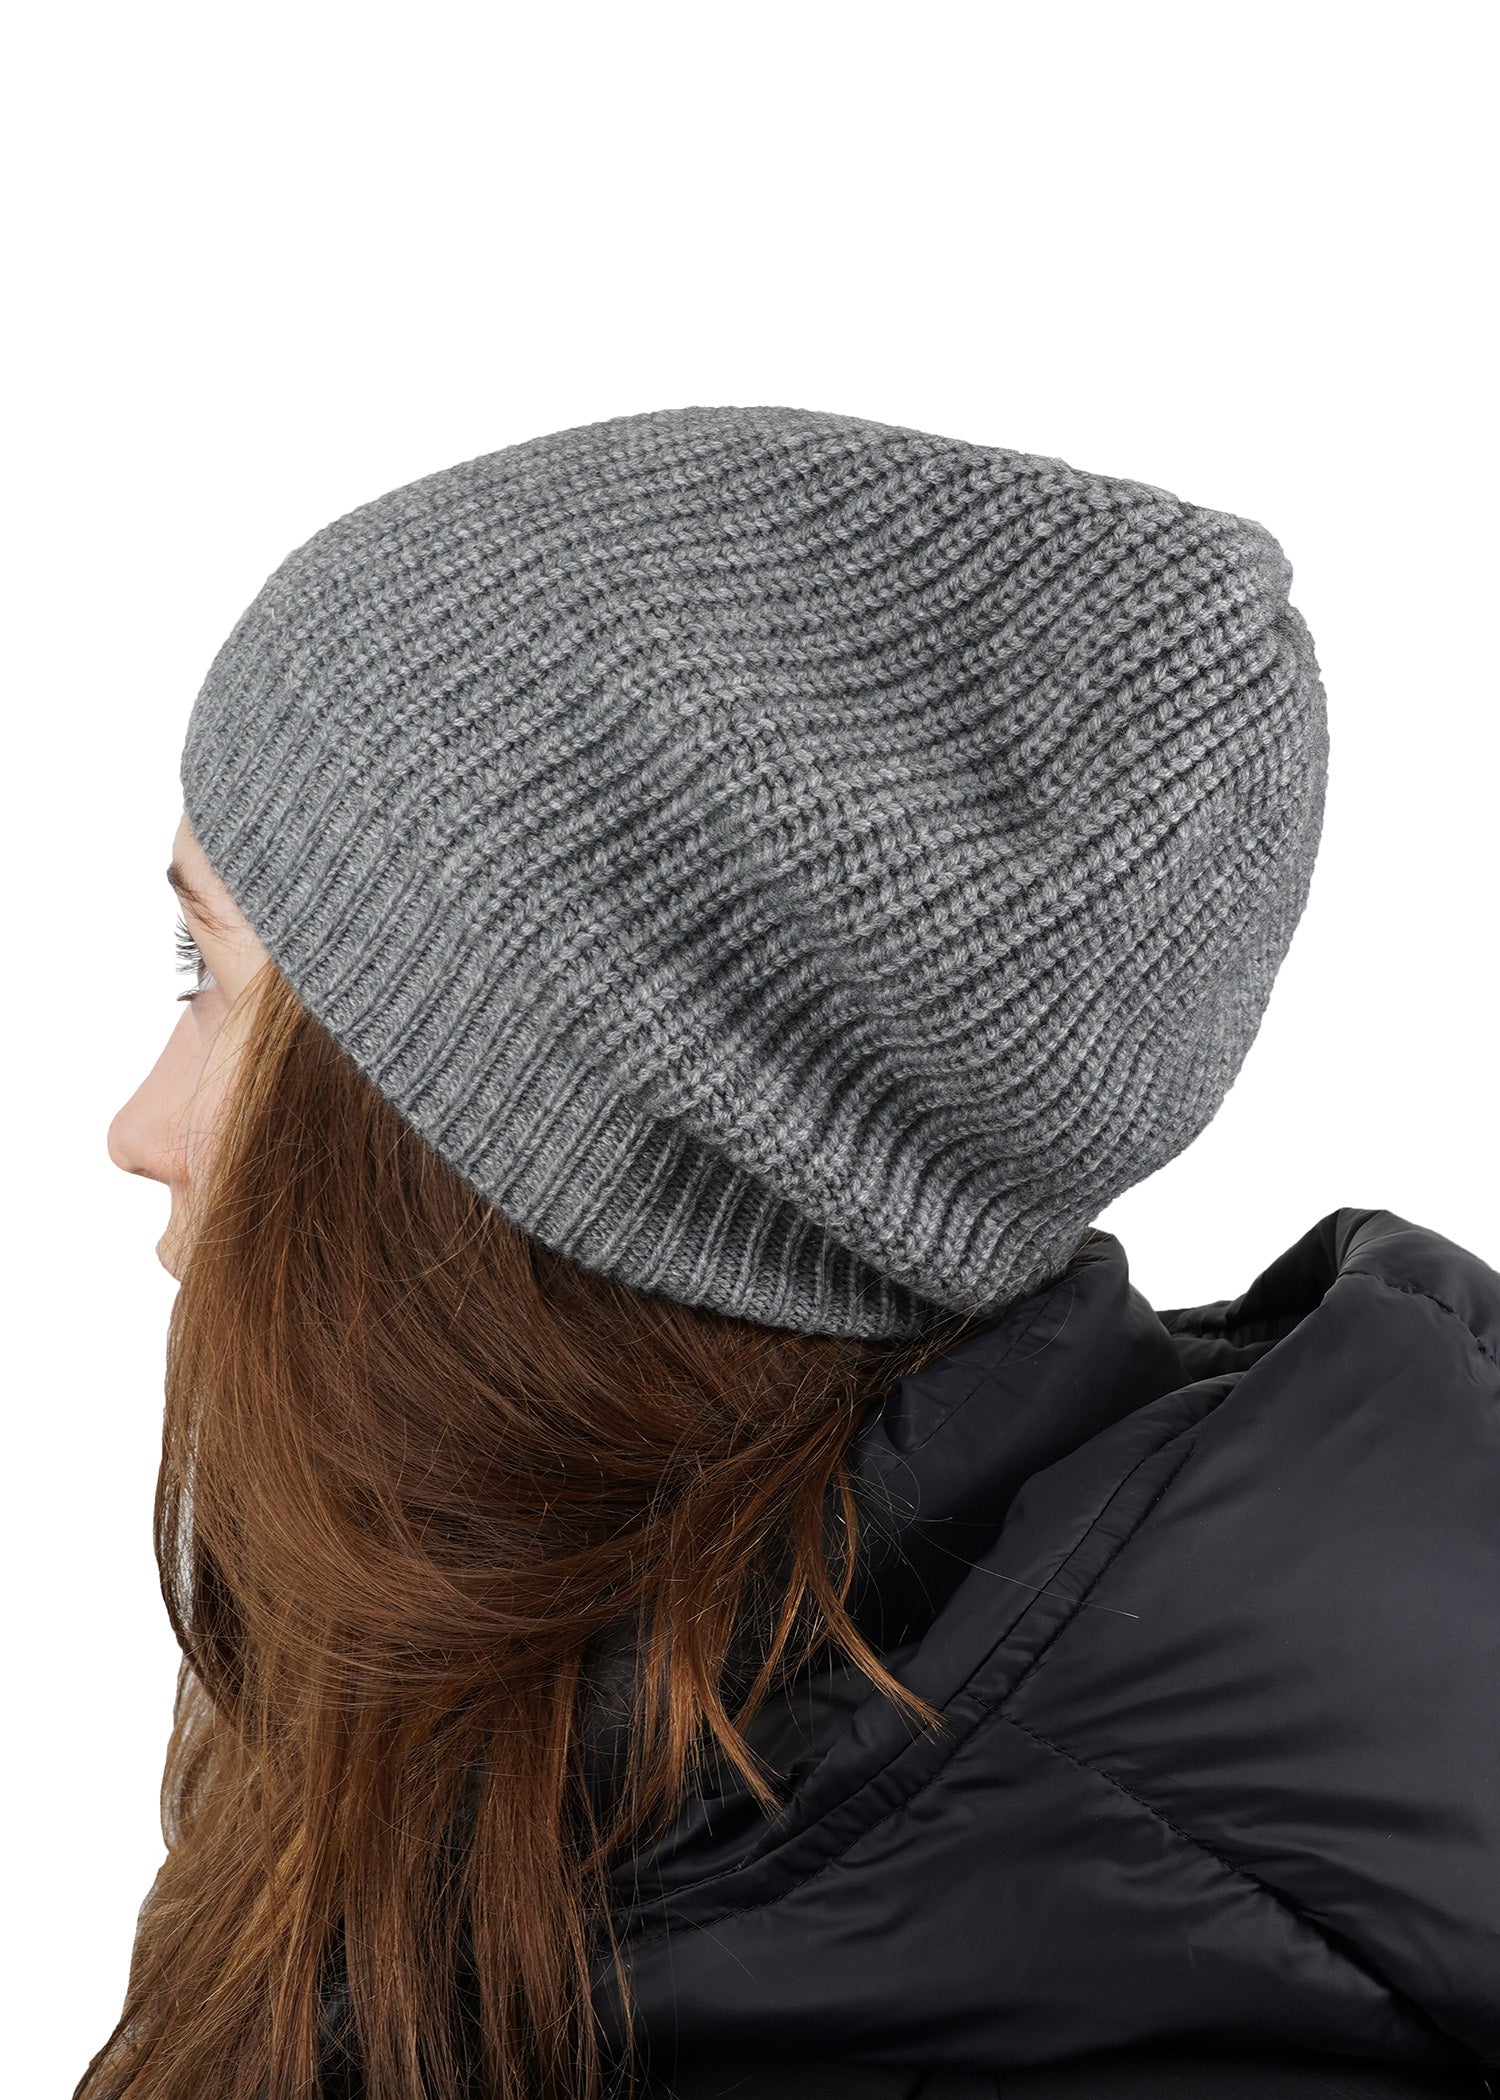 Lovelies Studio - Crafted from a blend of 70% fine wool and 30% cashmere, this beanie is the perfect marriage of warmth and luxury. Its sumptuously soft texture and exquisite craftsmanship make it a must-have accessory for any fashion-forward individual.